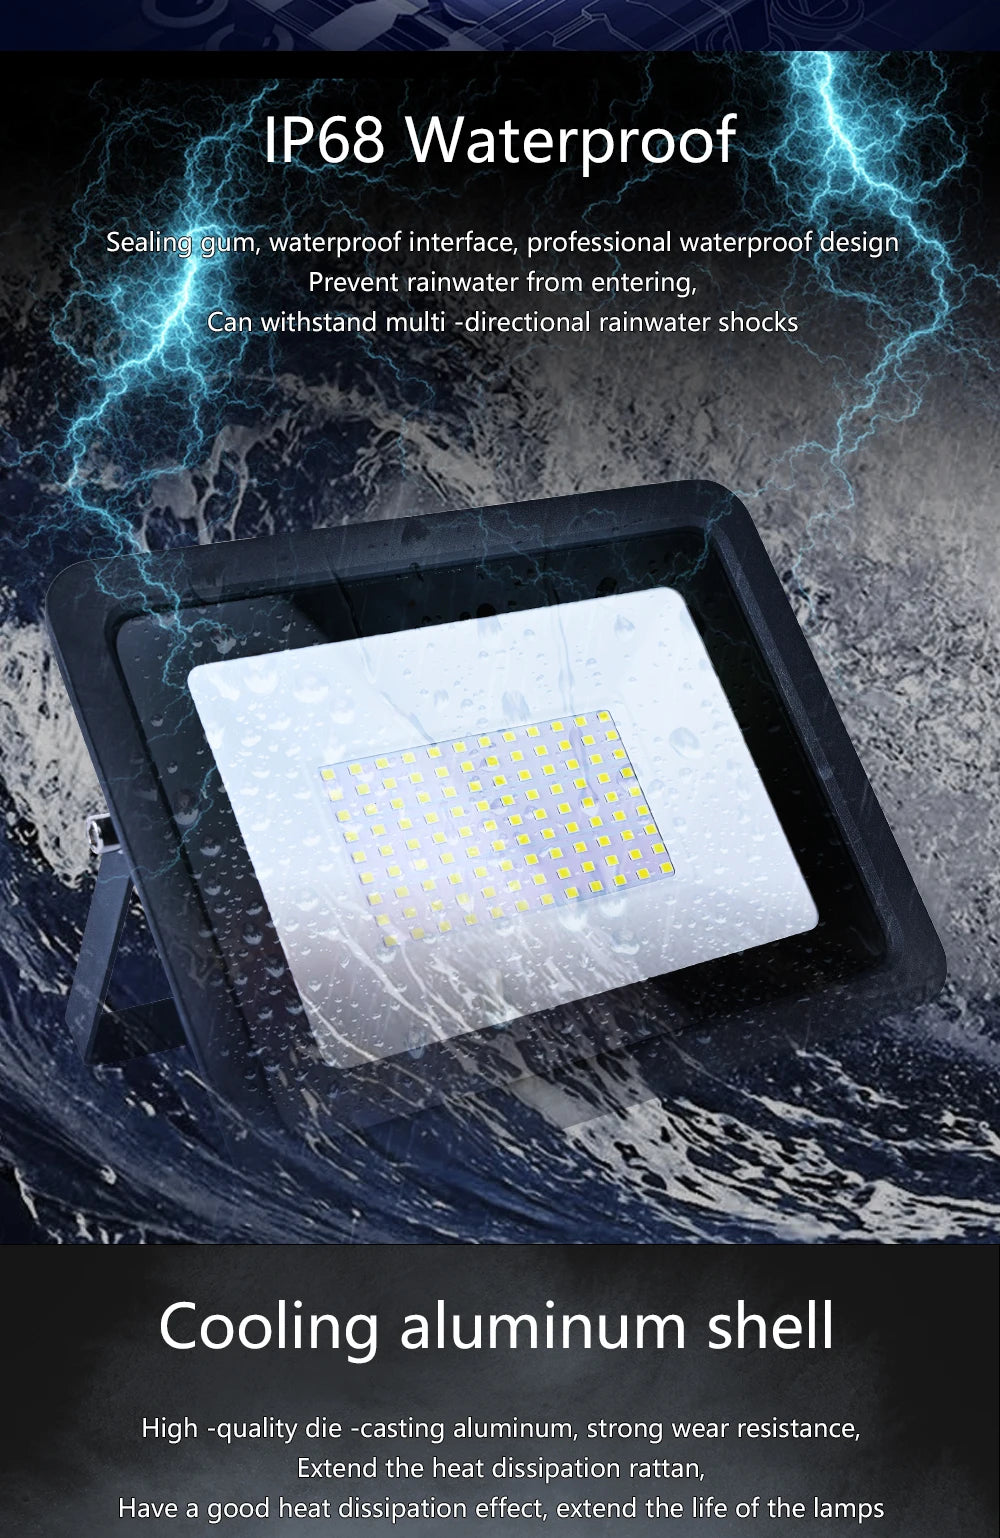 LED Flood Light, Waterproof design and shock-resistant construction ensure reliable performance in wet conditions.